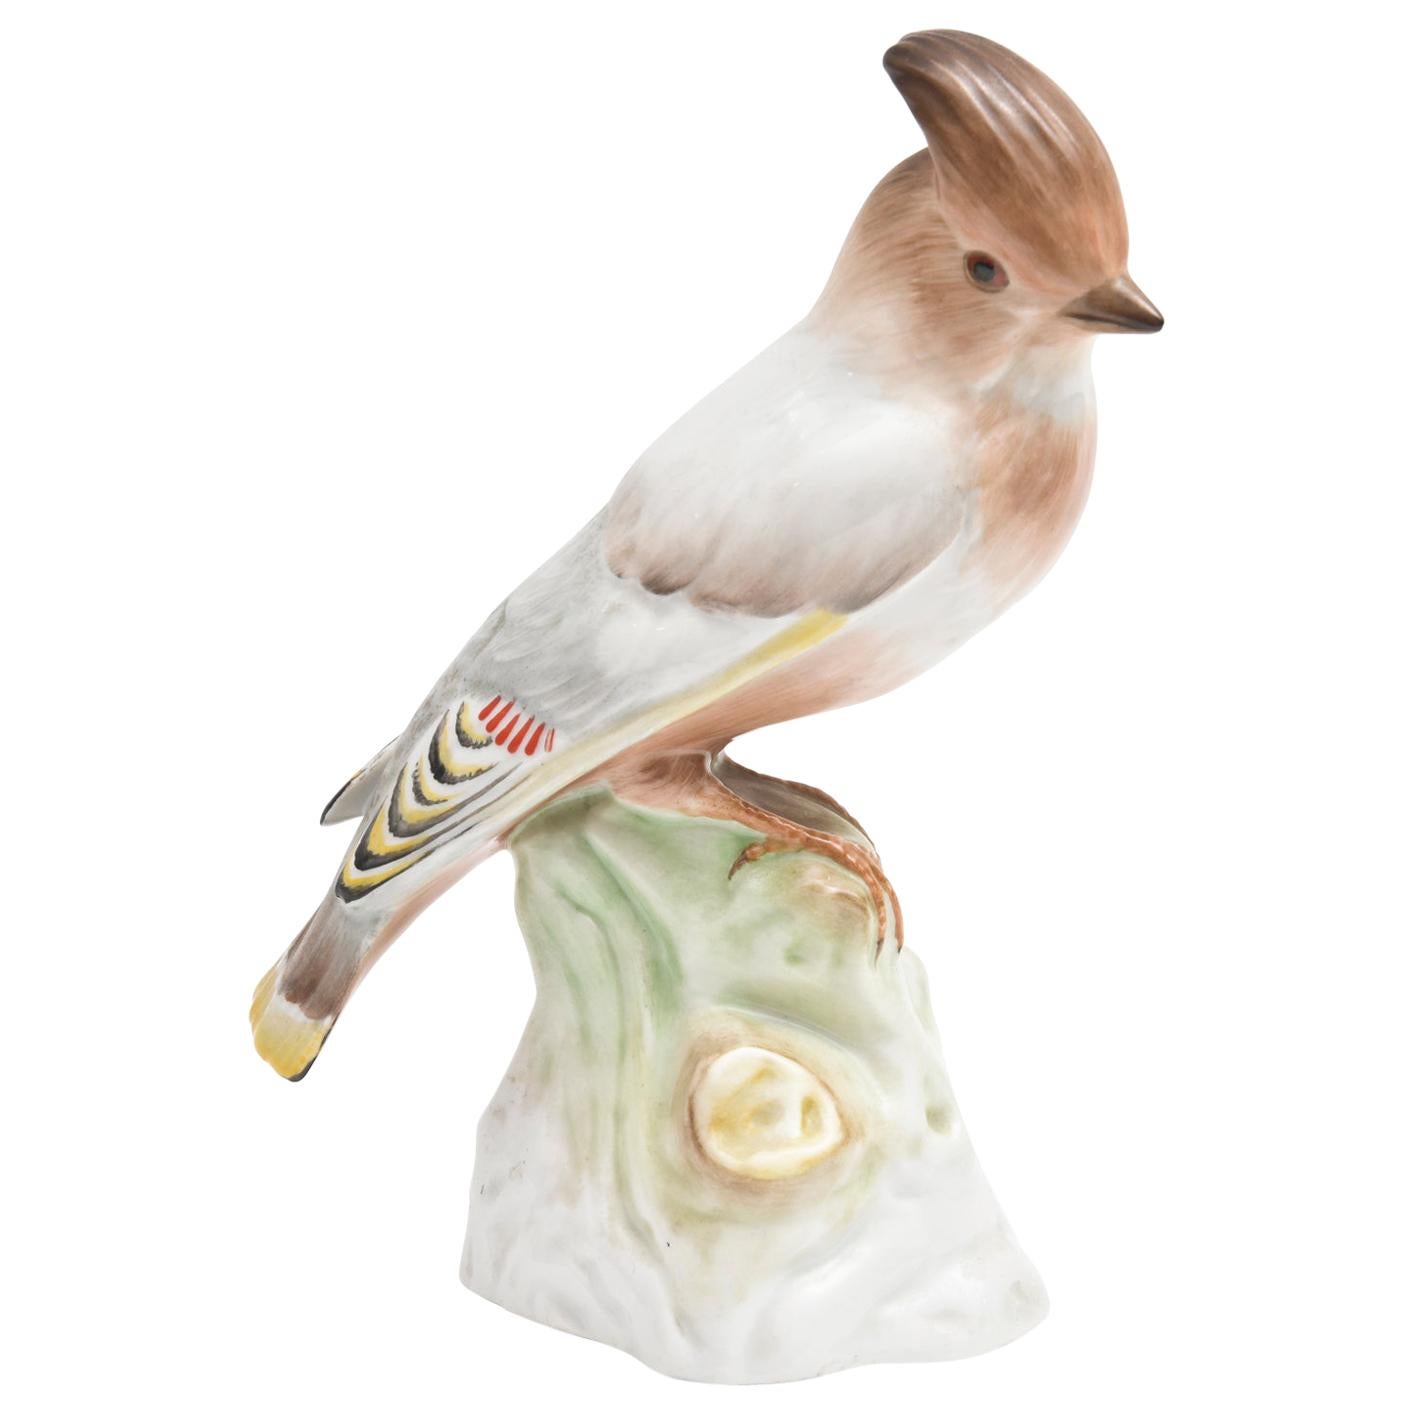 Antique Porcelain Bird Sculpture or Figurine, Hand Painted and Realistic, KPM